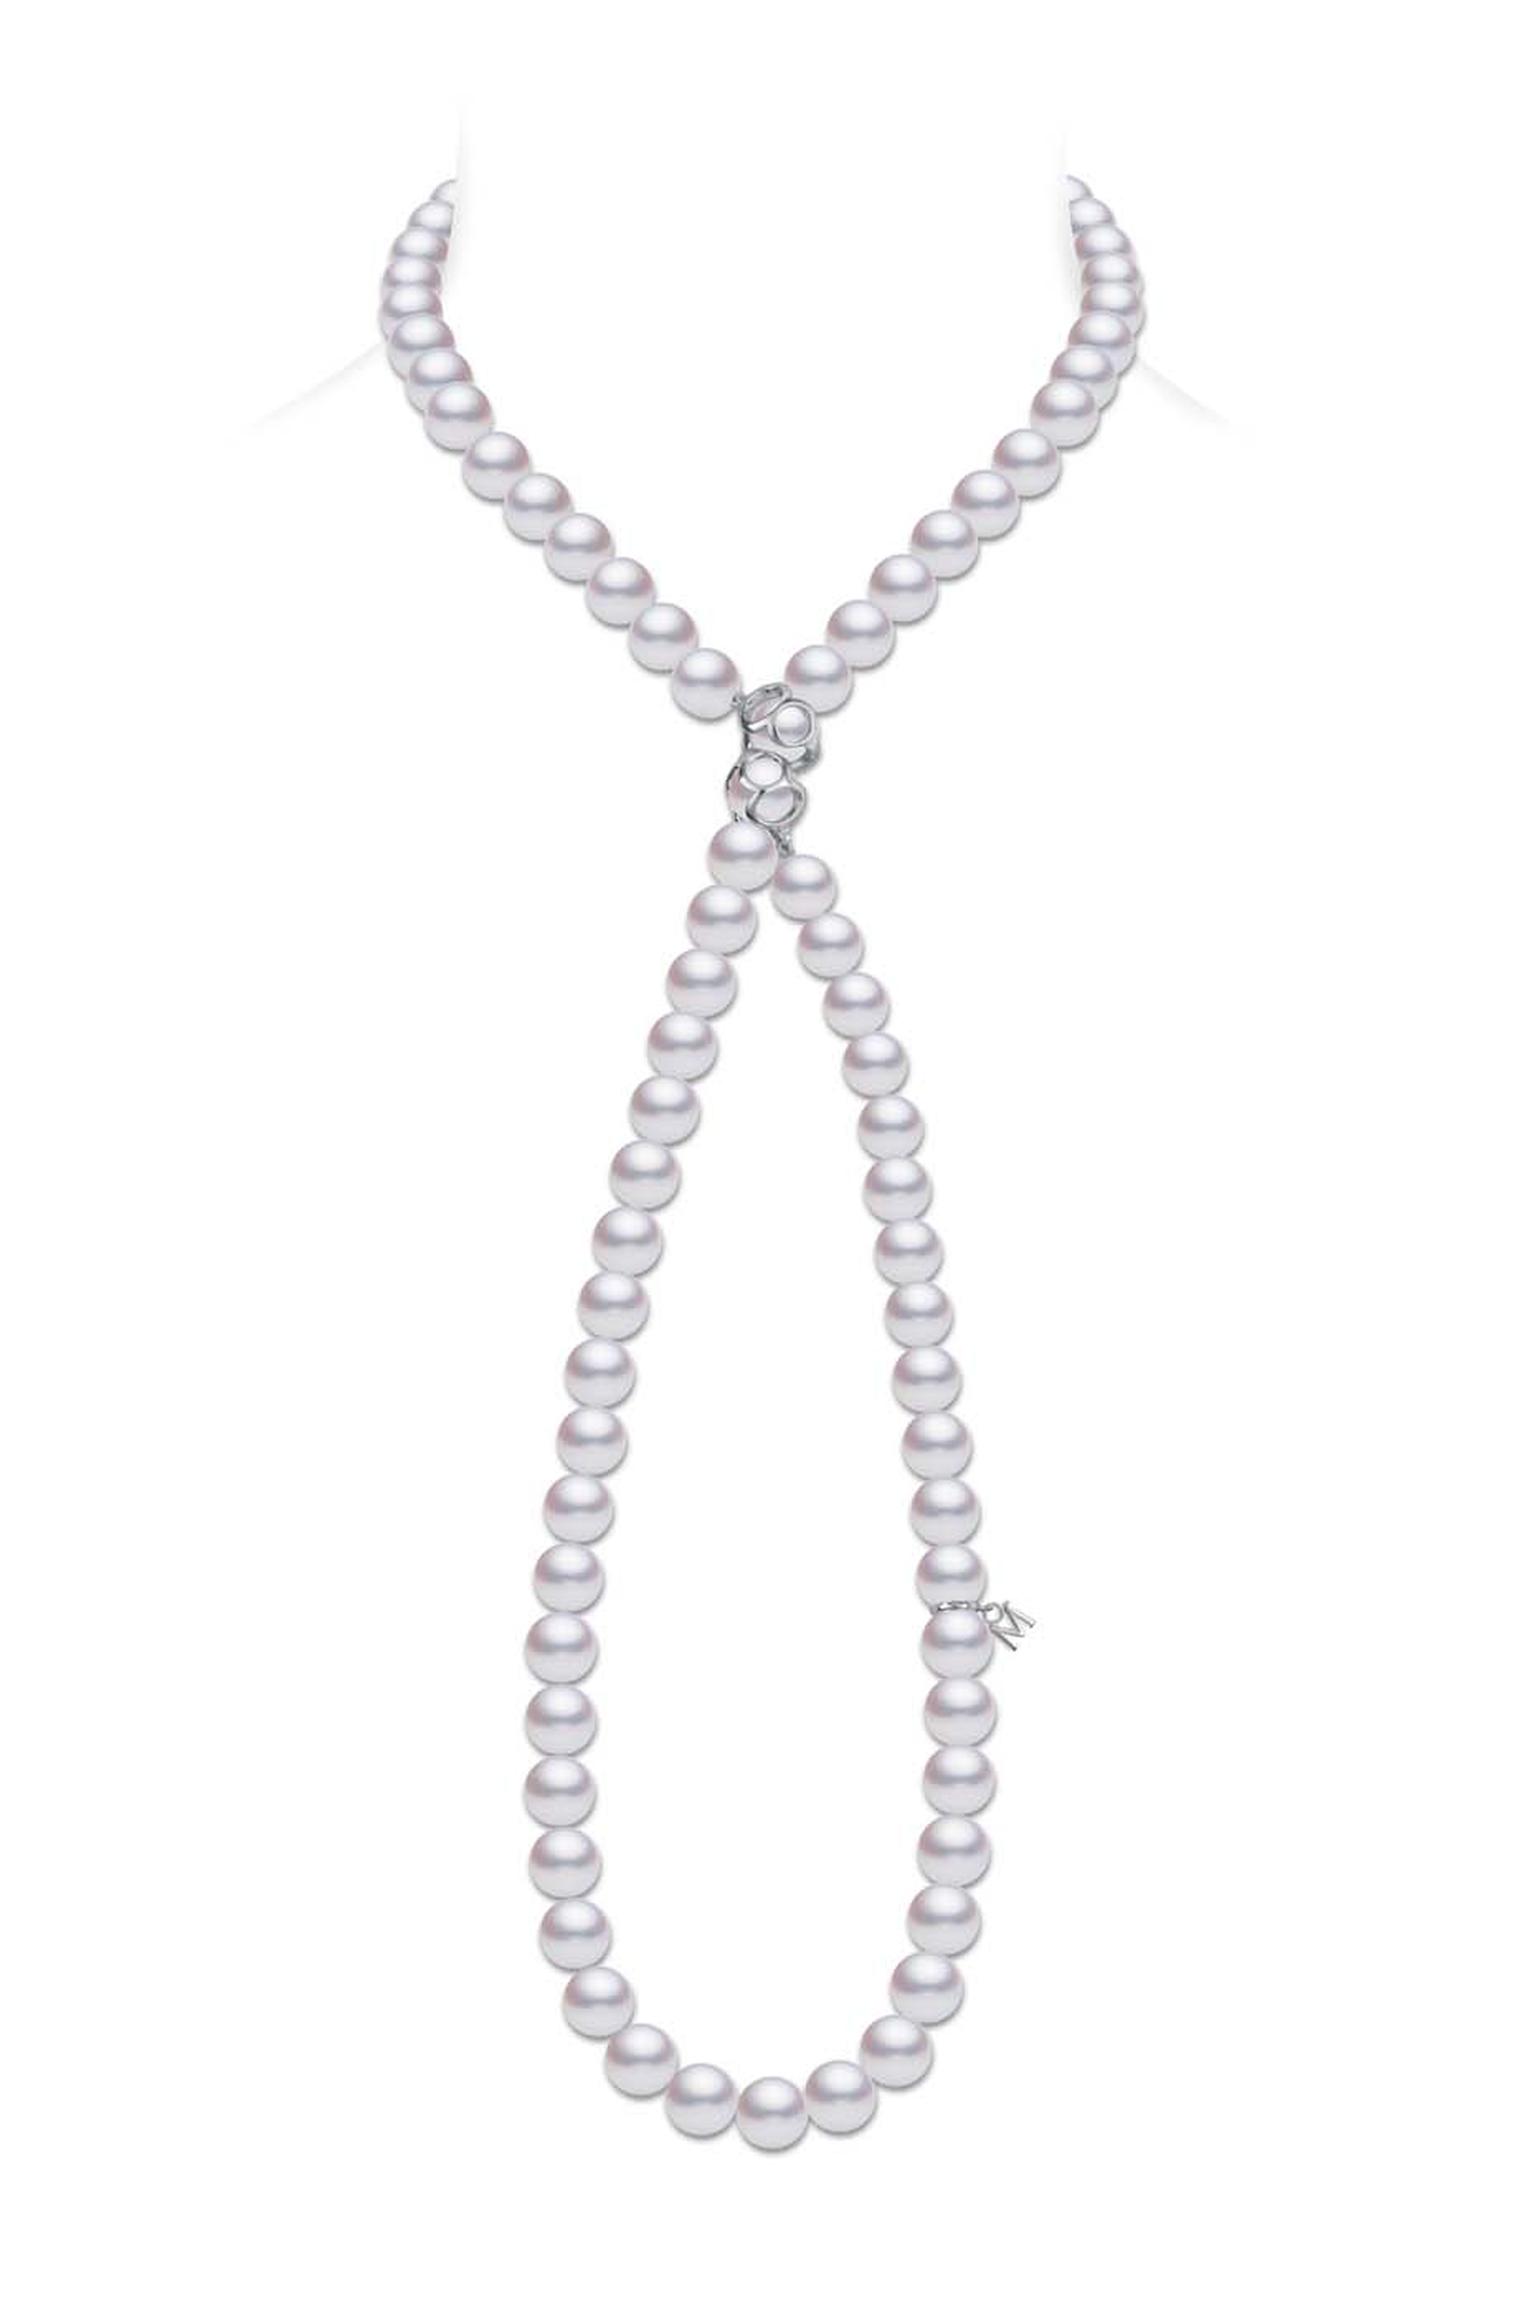 Mikimoto's Double Eight necklace is available from the pearl jeweller's New Bond Street Boutique and Harrods Fine Jewellery Room.